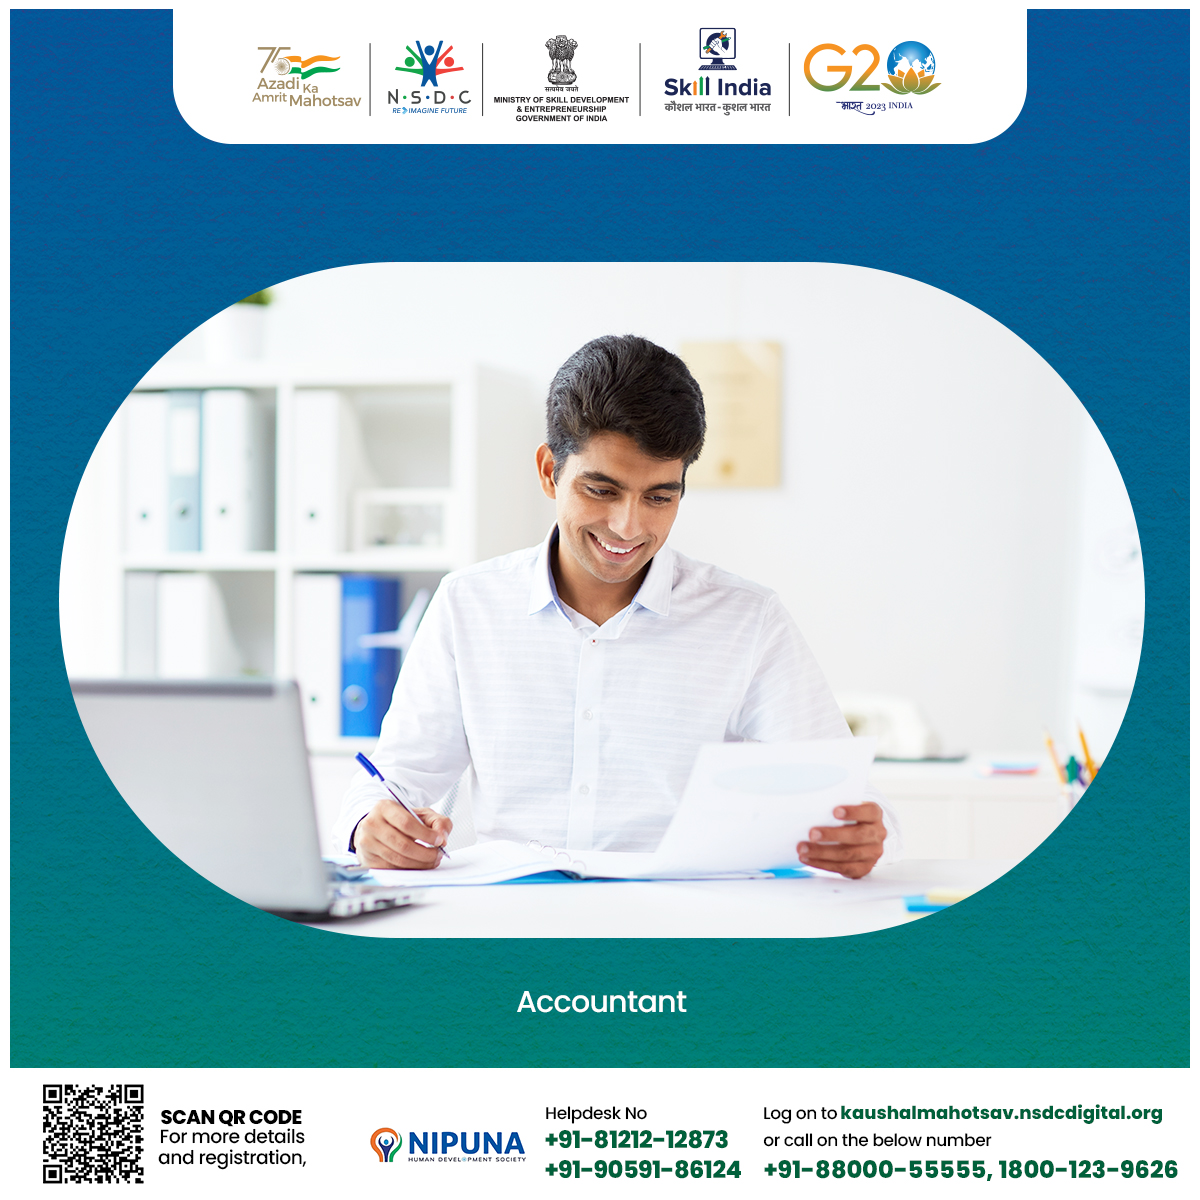 Kaushal Mahotsav, a glorious opportunity for your bright and successful future, coming to Secunderabad, Telangana! Free registration and a 100% transparent & unbiased selection process. A unique initiative of NSDC, under the aegis of MSDE. Register Now! kaushalmahotsav.nsdcdigital.org/Telangana/Cand…